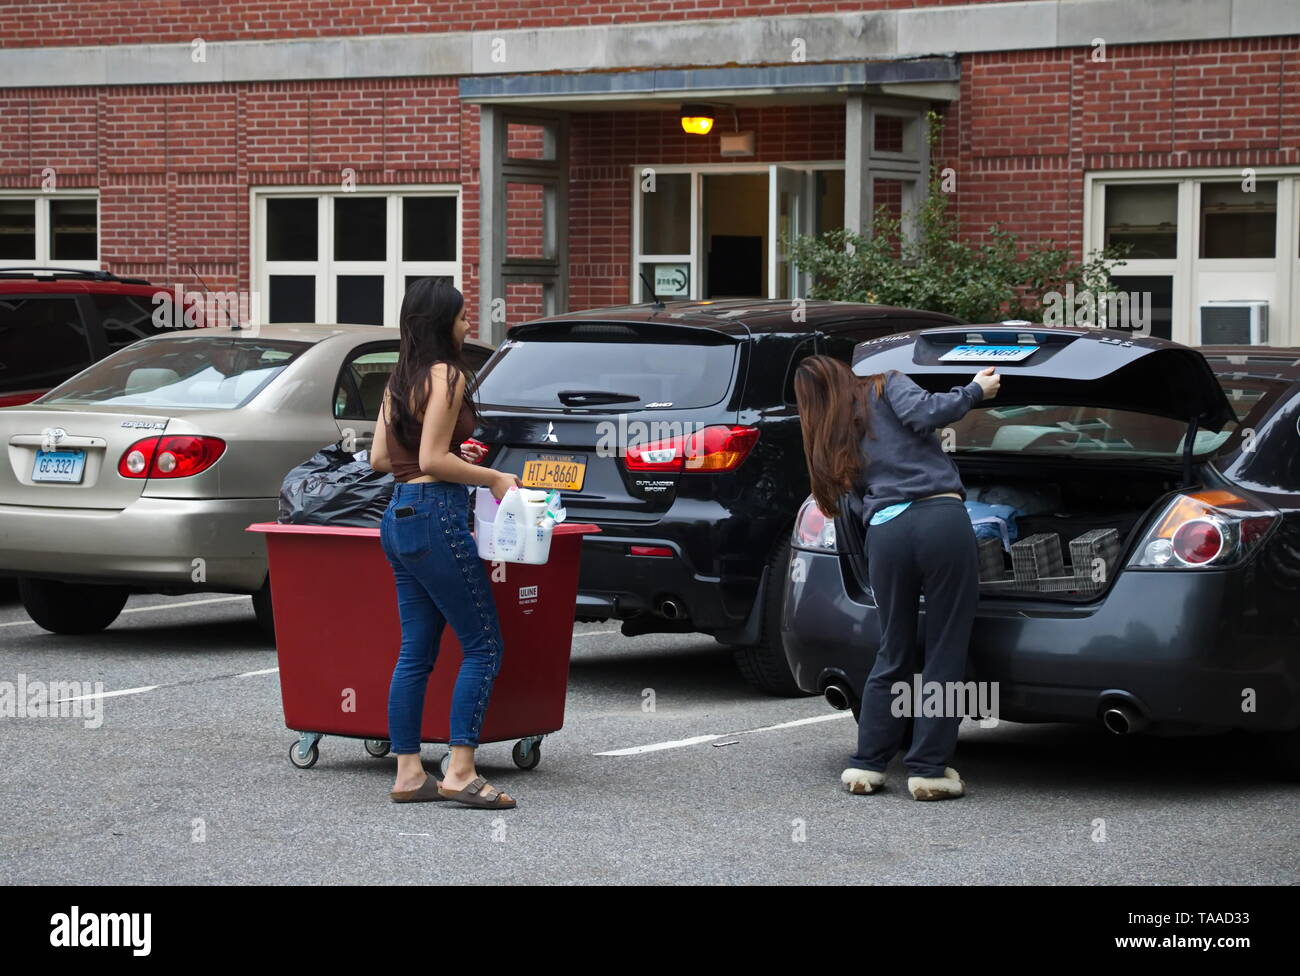 Storrs, CT / USA - May 10, 2019: A freshman moves out of the dorms with help from her friend Stock Photo